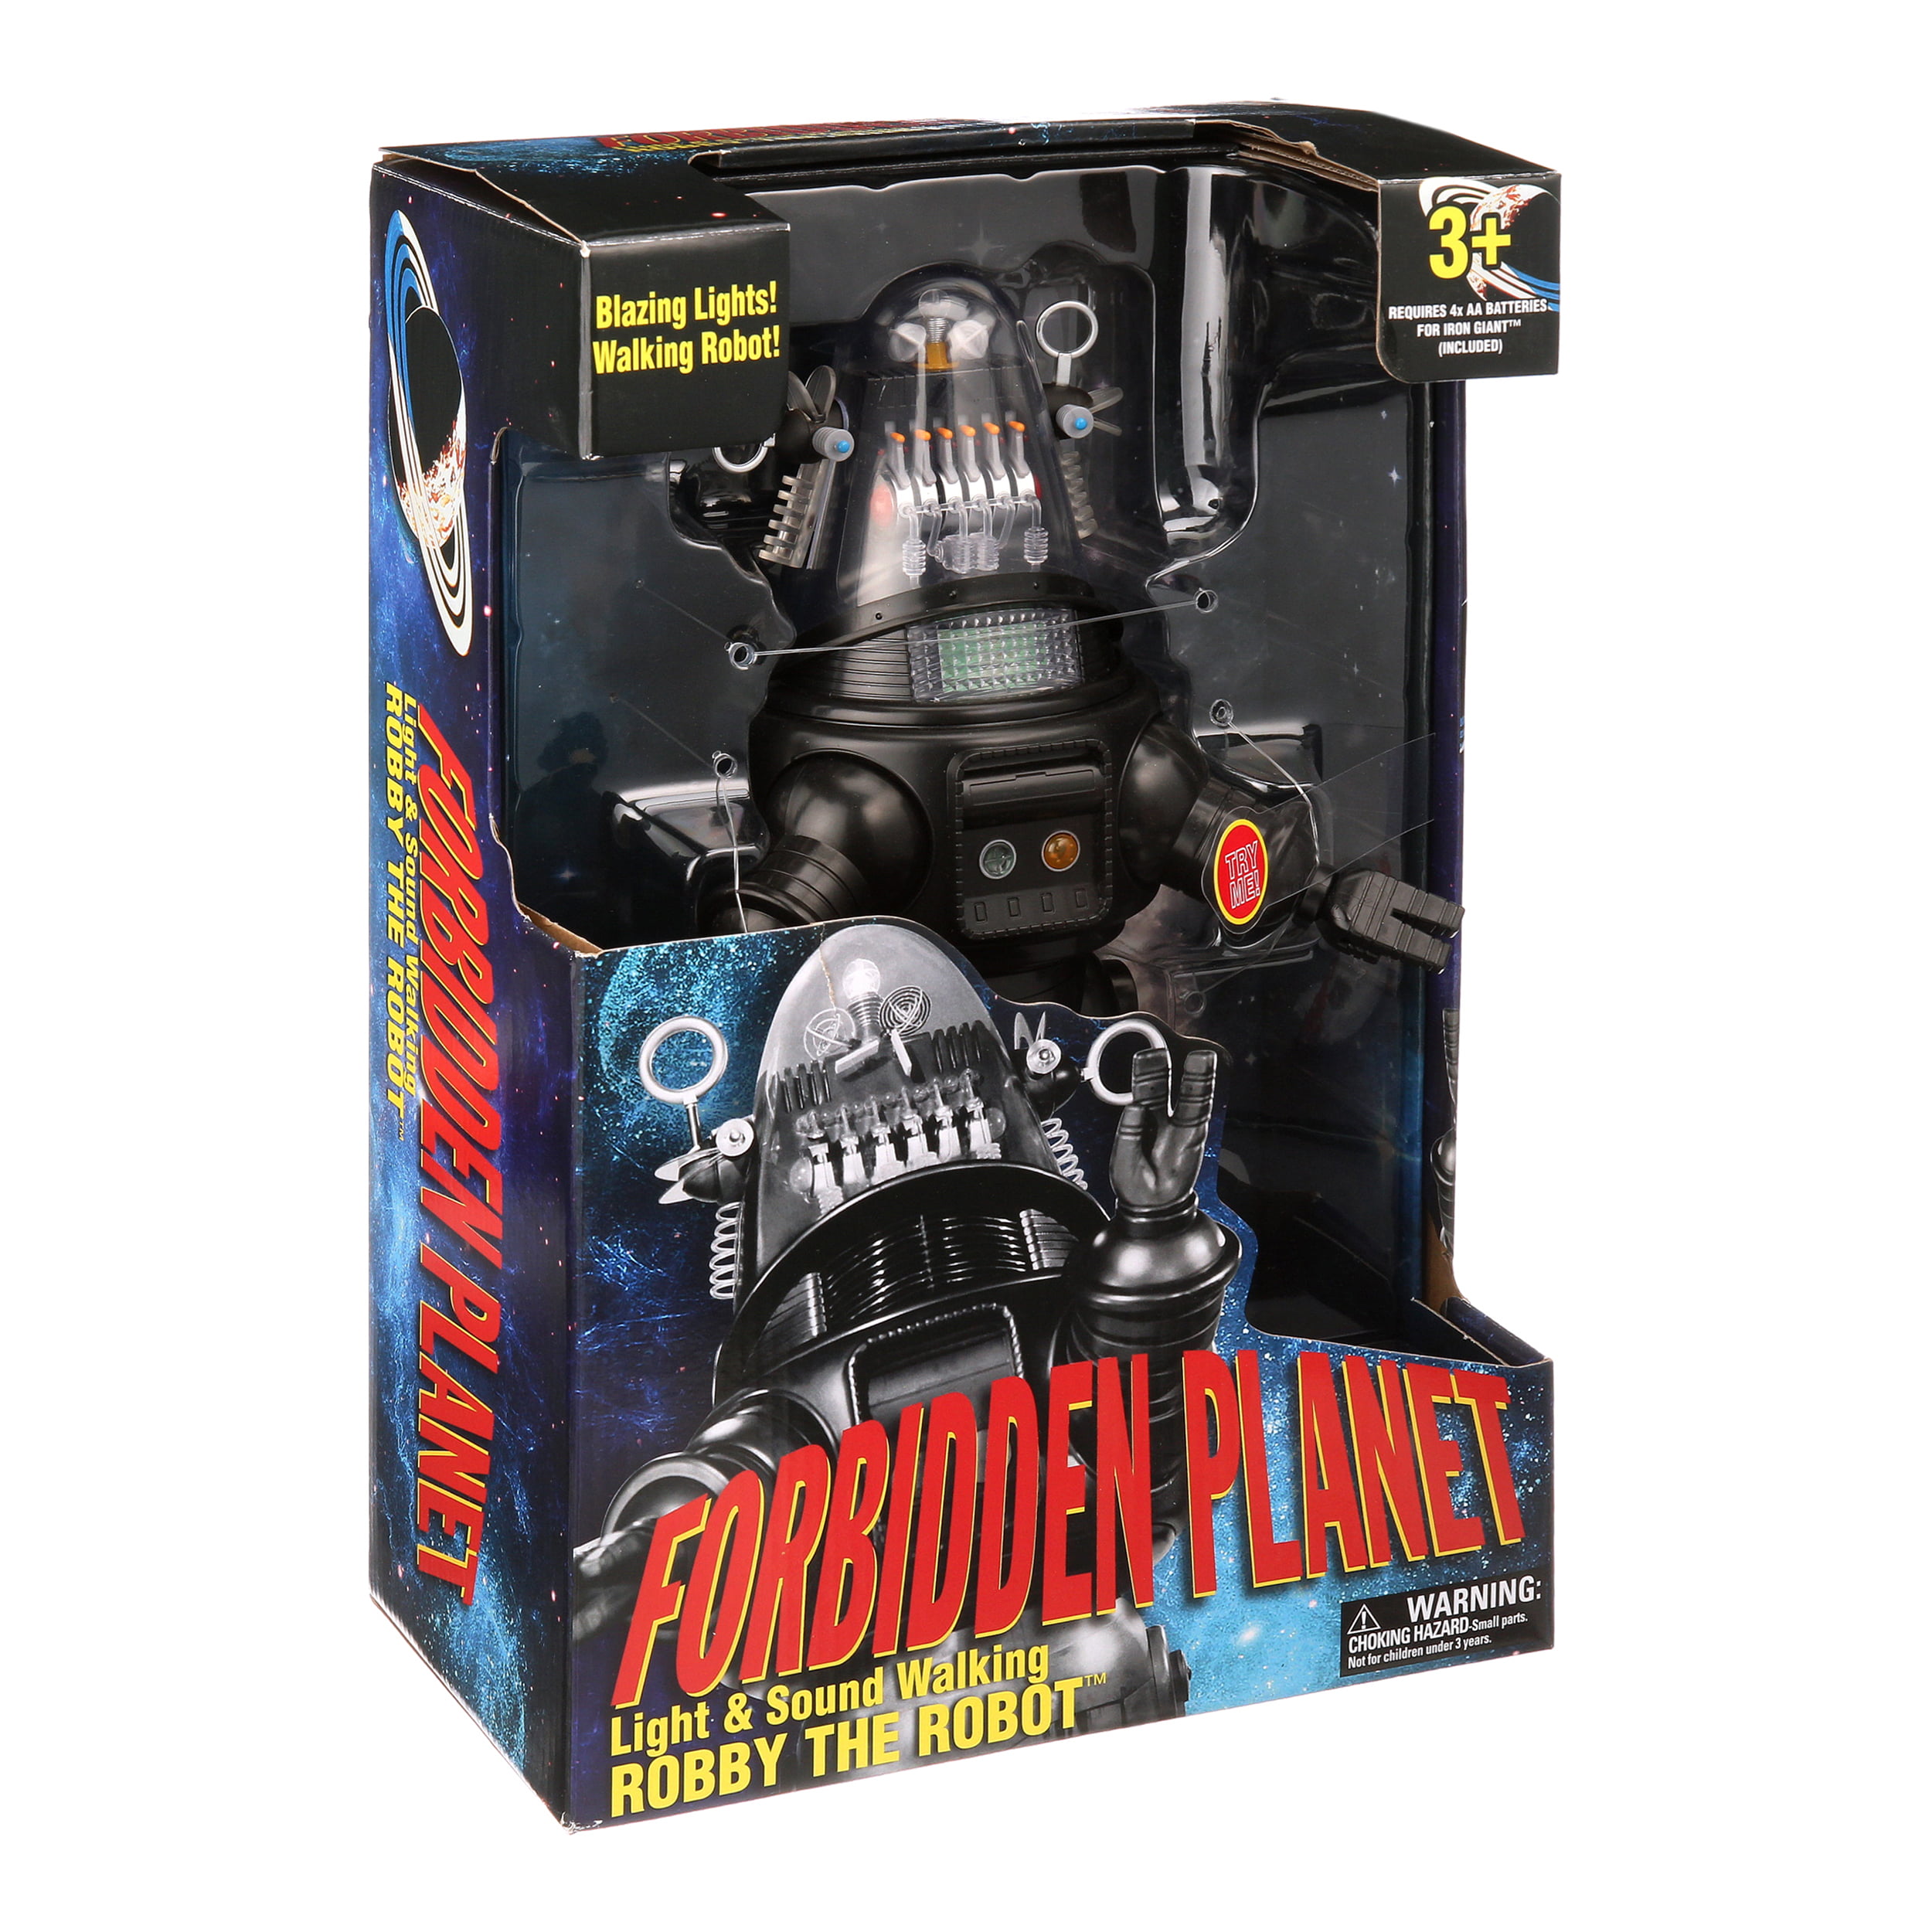 The Robot Light & Sound Walking Toy 15 Action Figure Forbidden Planet Robby for sale online 